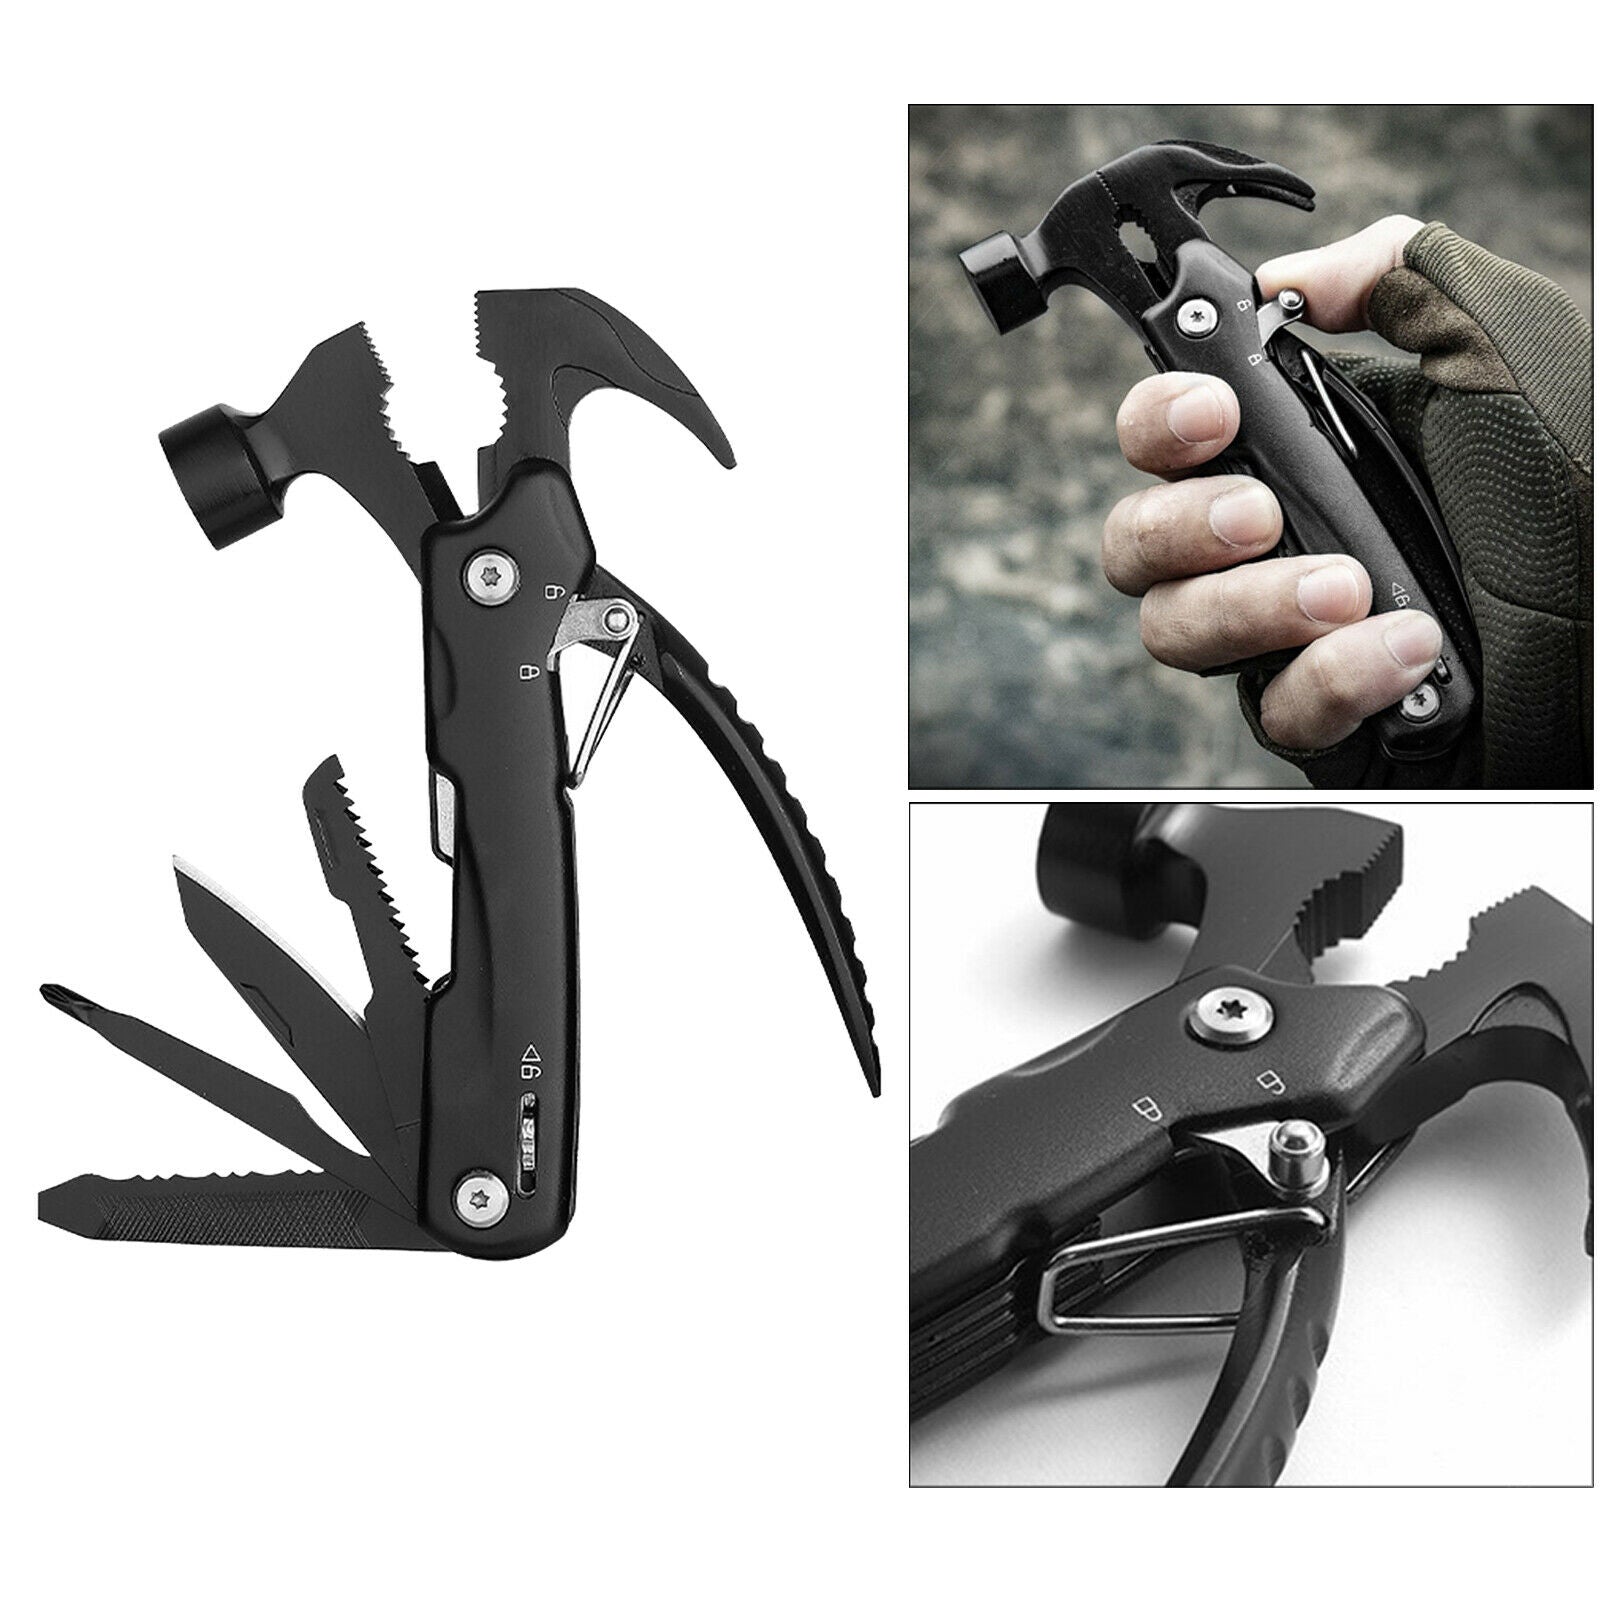 Stainless Steel Multitool Hammer Camping Survival Tools Gadgets Men Gifts